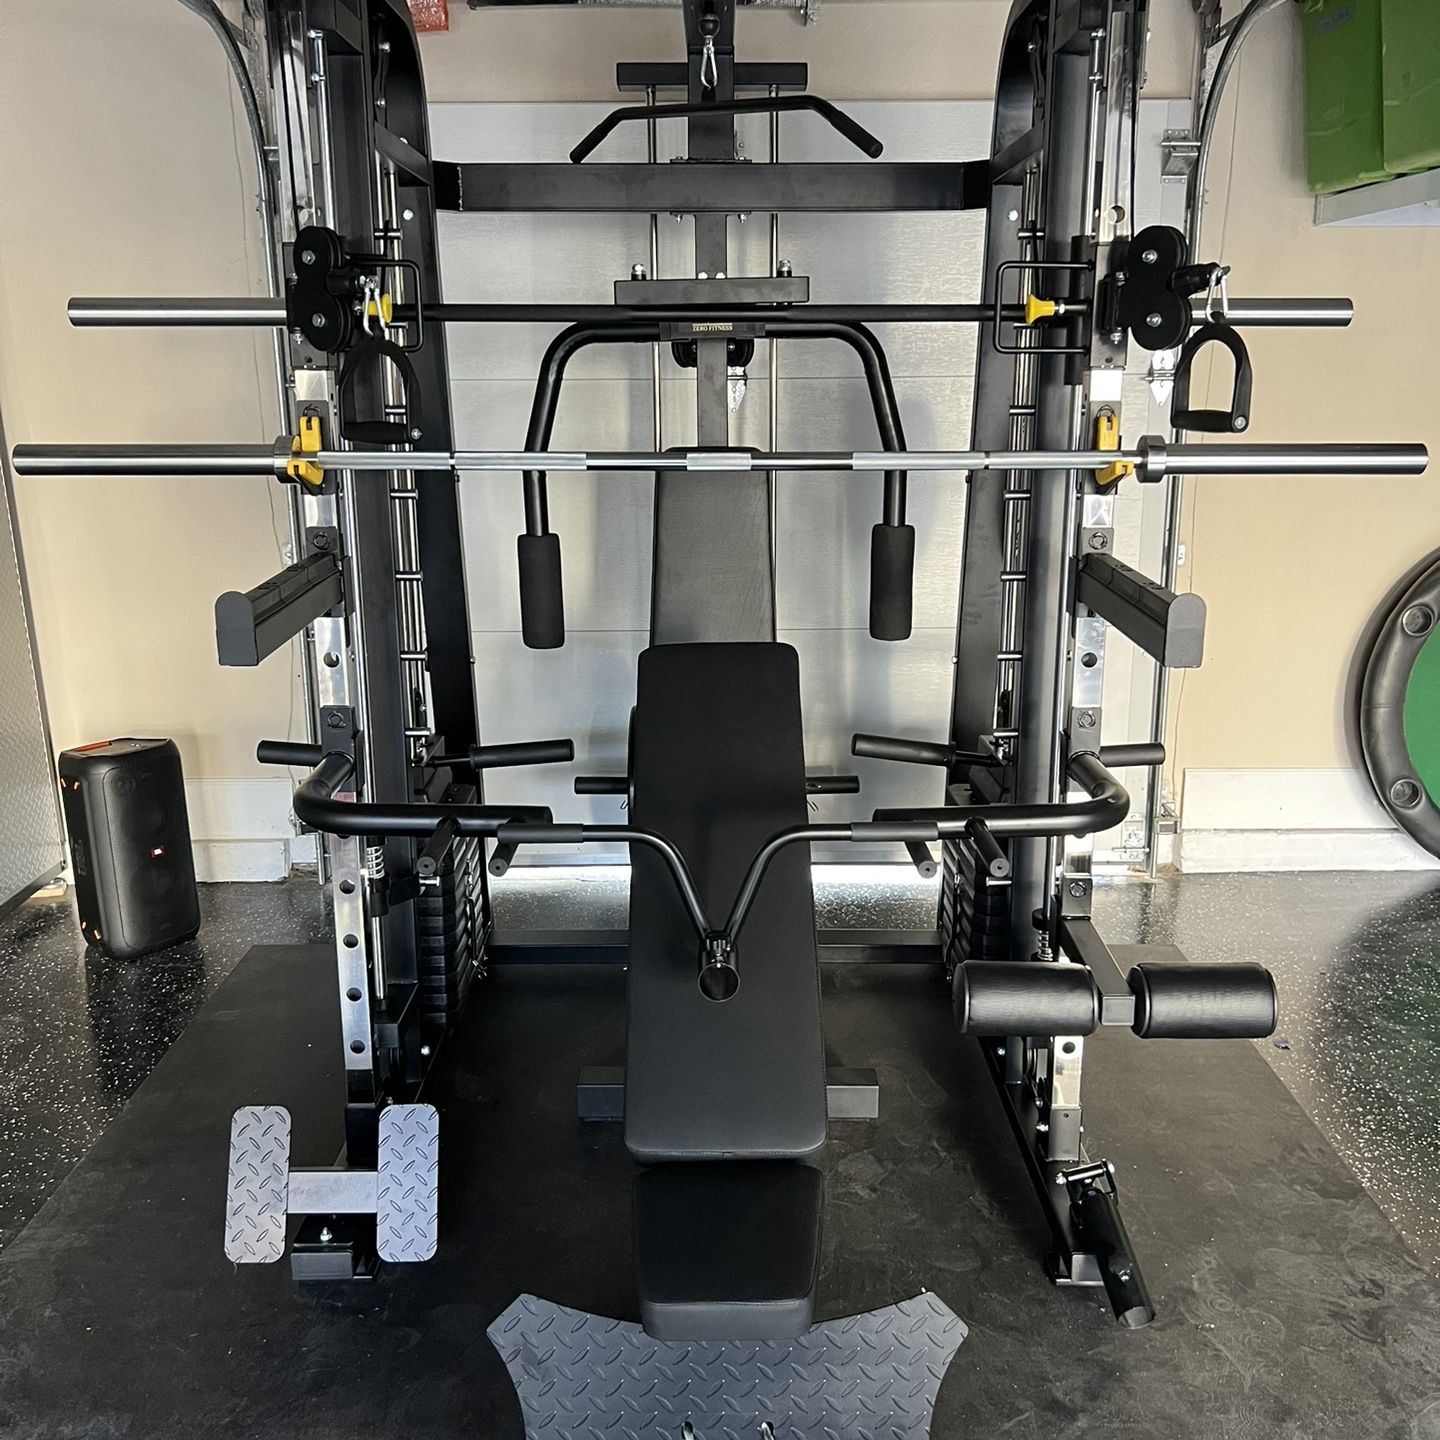 Smith Machine 300 | Adjustable Bench | 245lb Cast Iron Olympic Weights | 7ft Olympic Bar | Fitness | Gym Equipment | FREE DELIVERY 🚚 